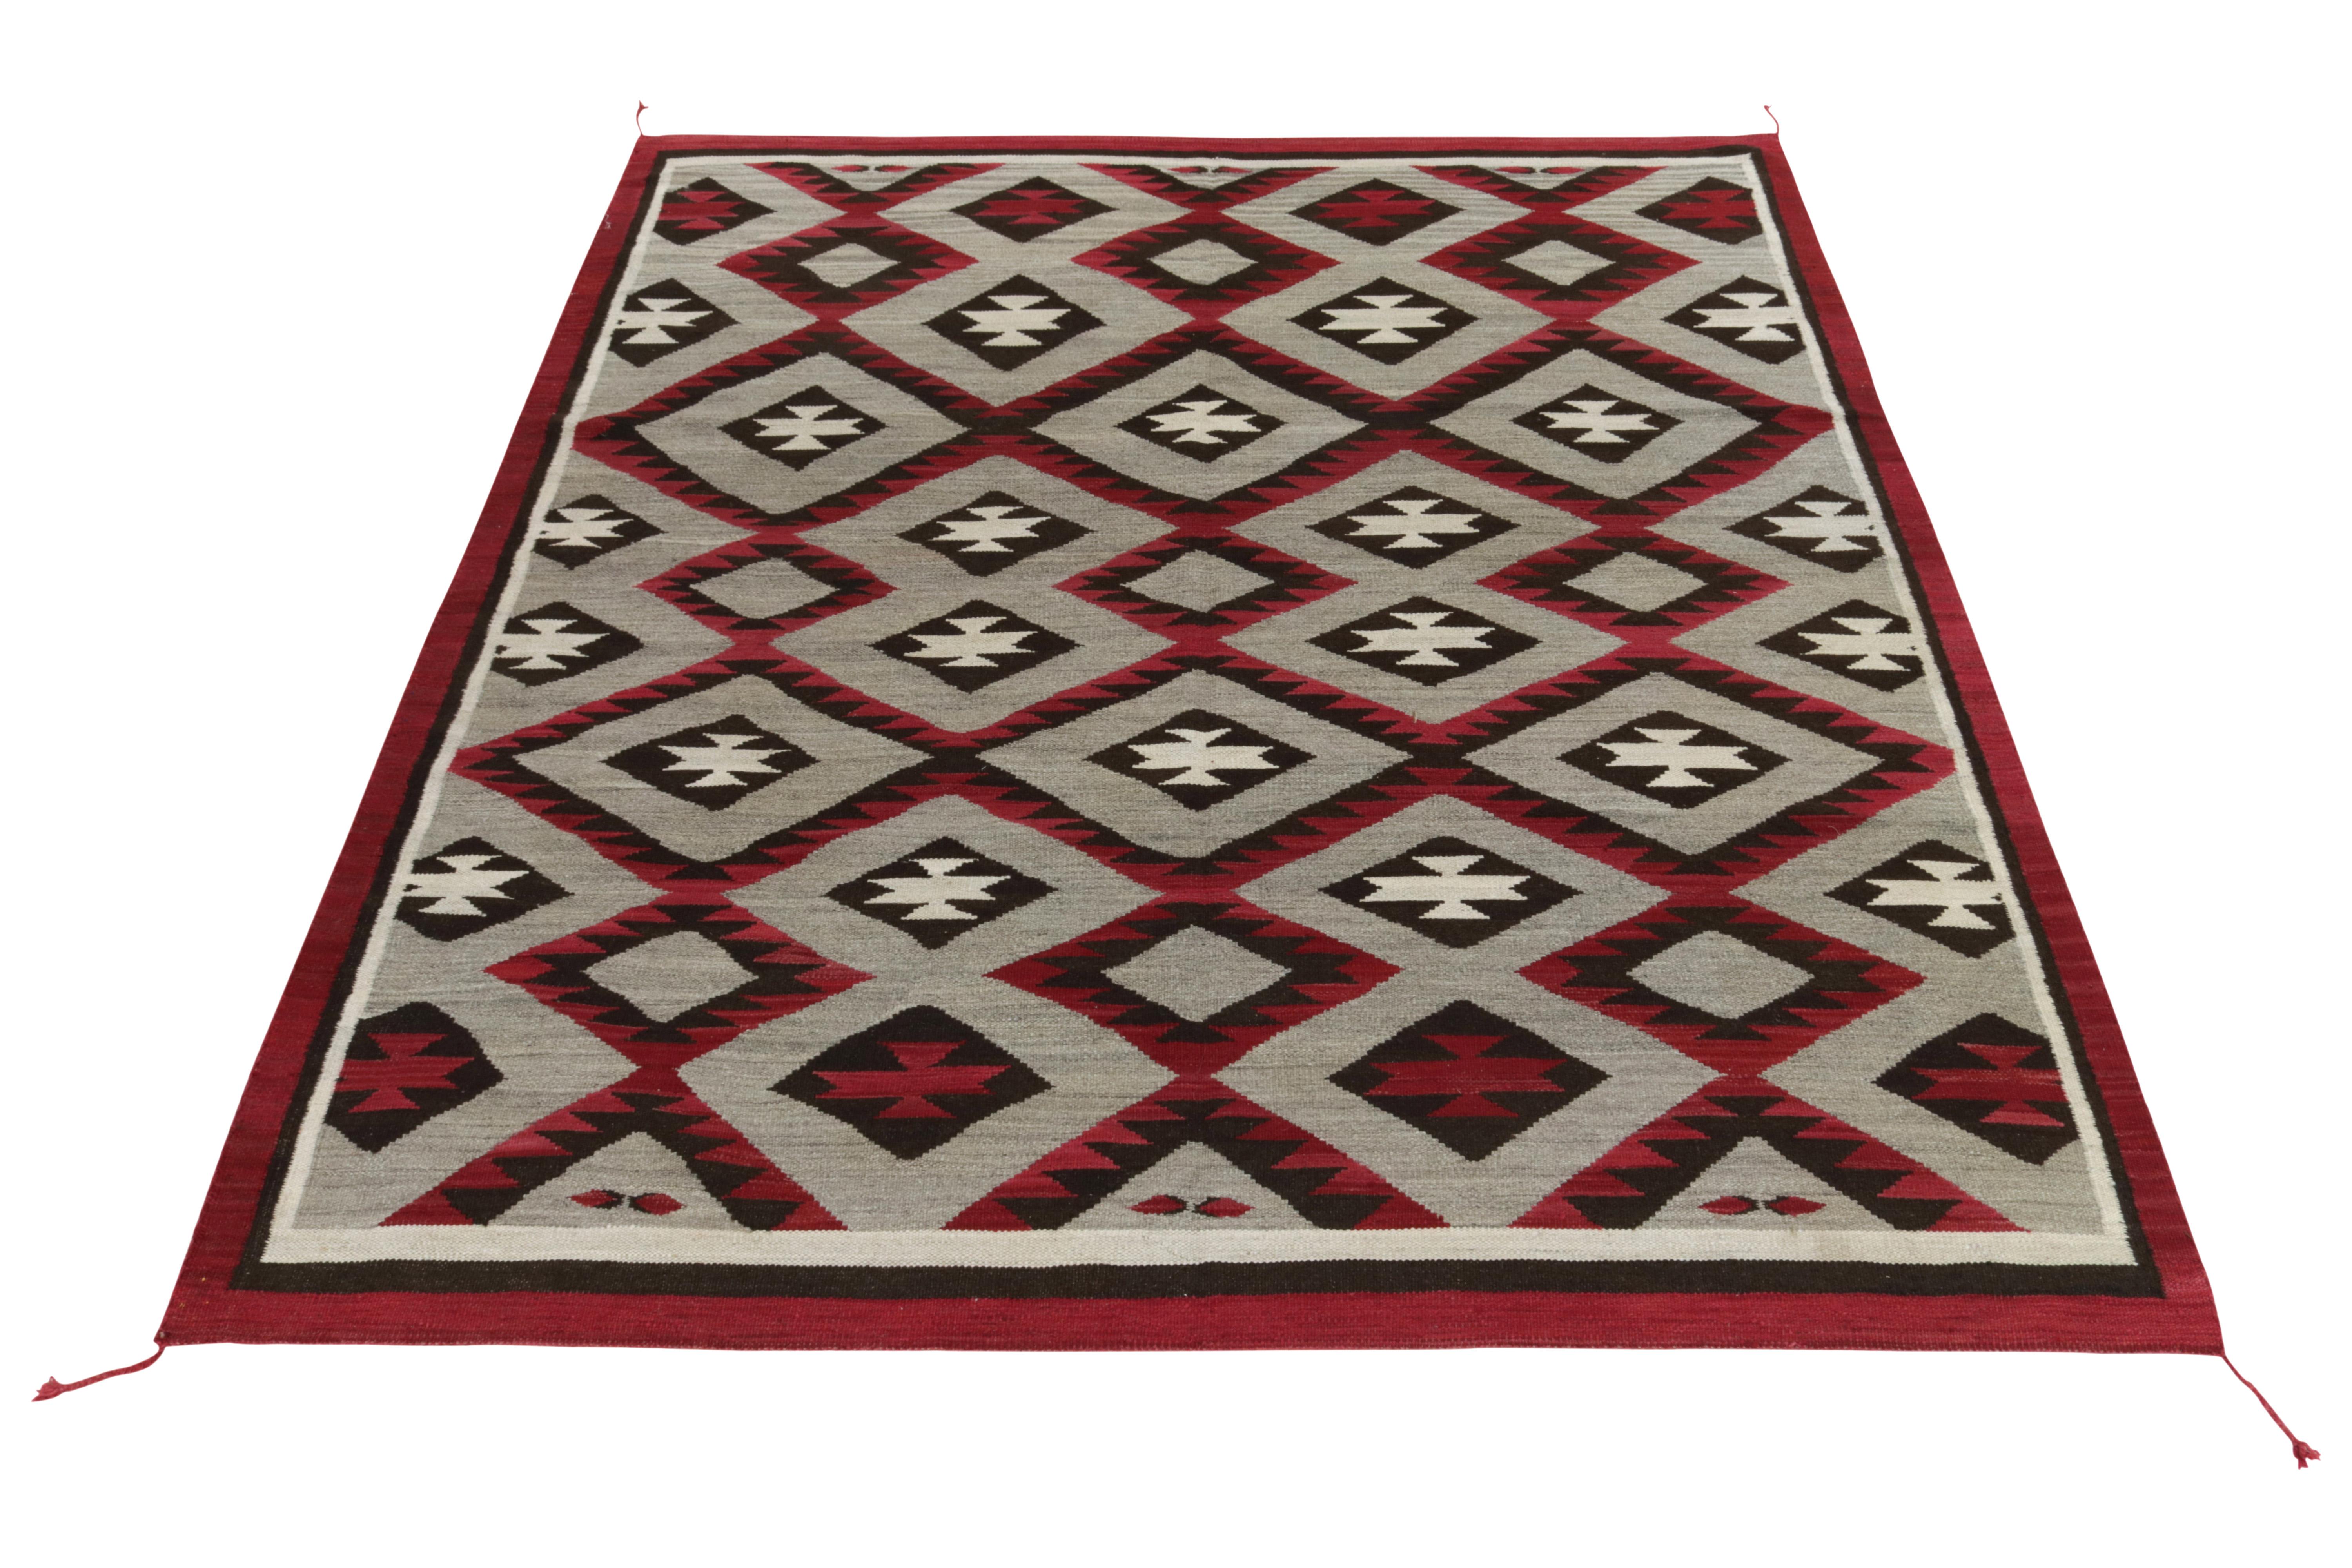 Handwoven in fine quality wool, an 8x10 ode to Navajo Kilim rug blending tribal sensibilities with impeccable modern reimagining. Inspired by the 1920s Navajo flatweaves, this flat weave showcases a sharp tribal geometric pattern in an idyllic